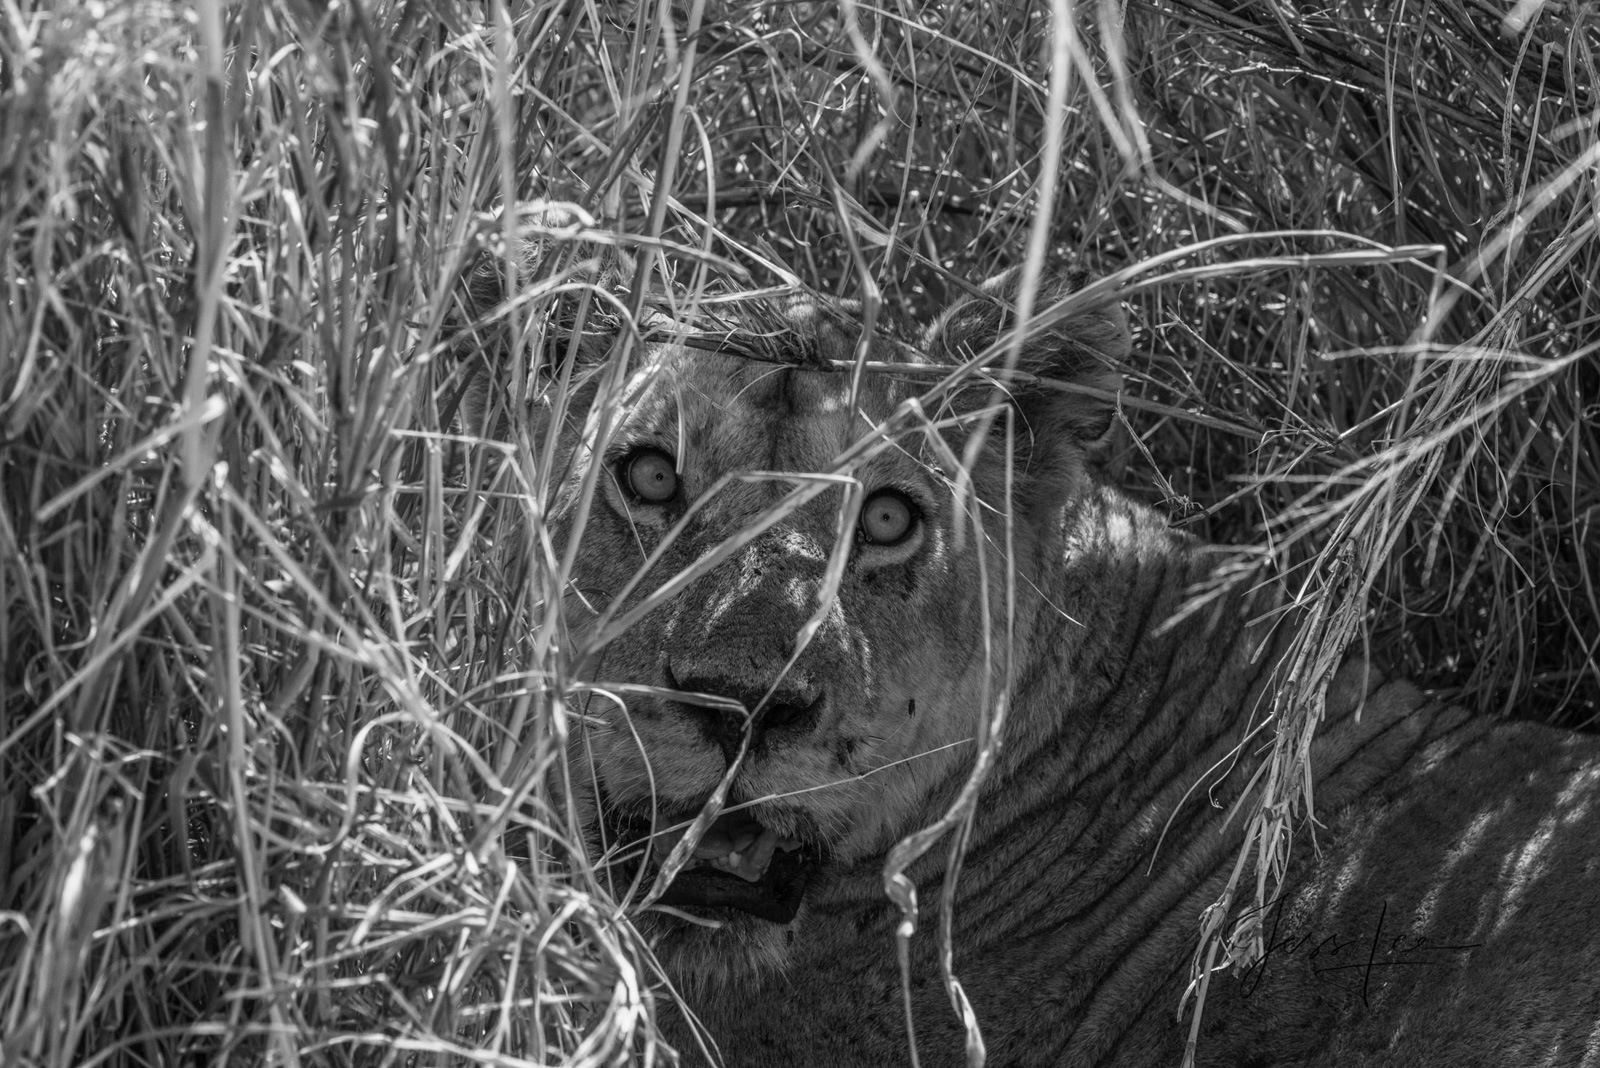 African Lion hiding in the grass. Bring home the power and beauty with this limited edition African Wildlife photography print...